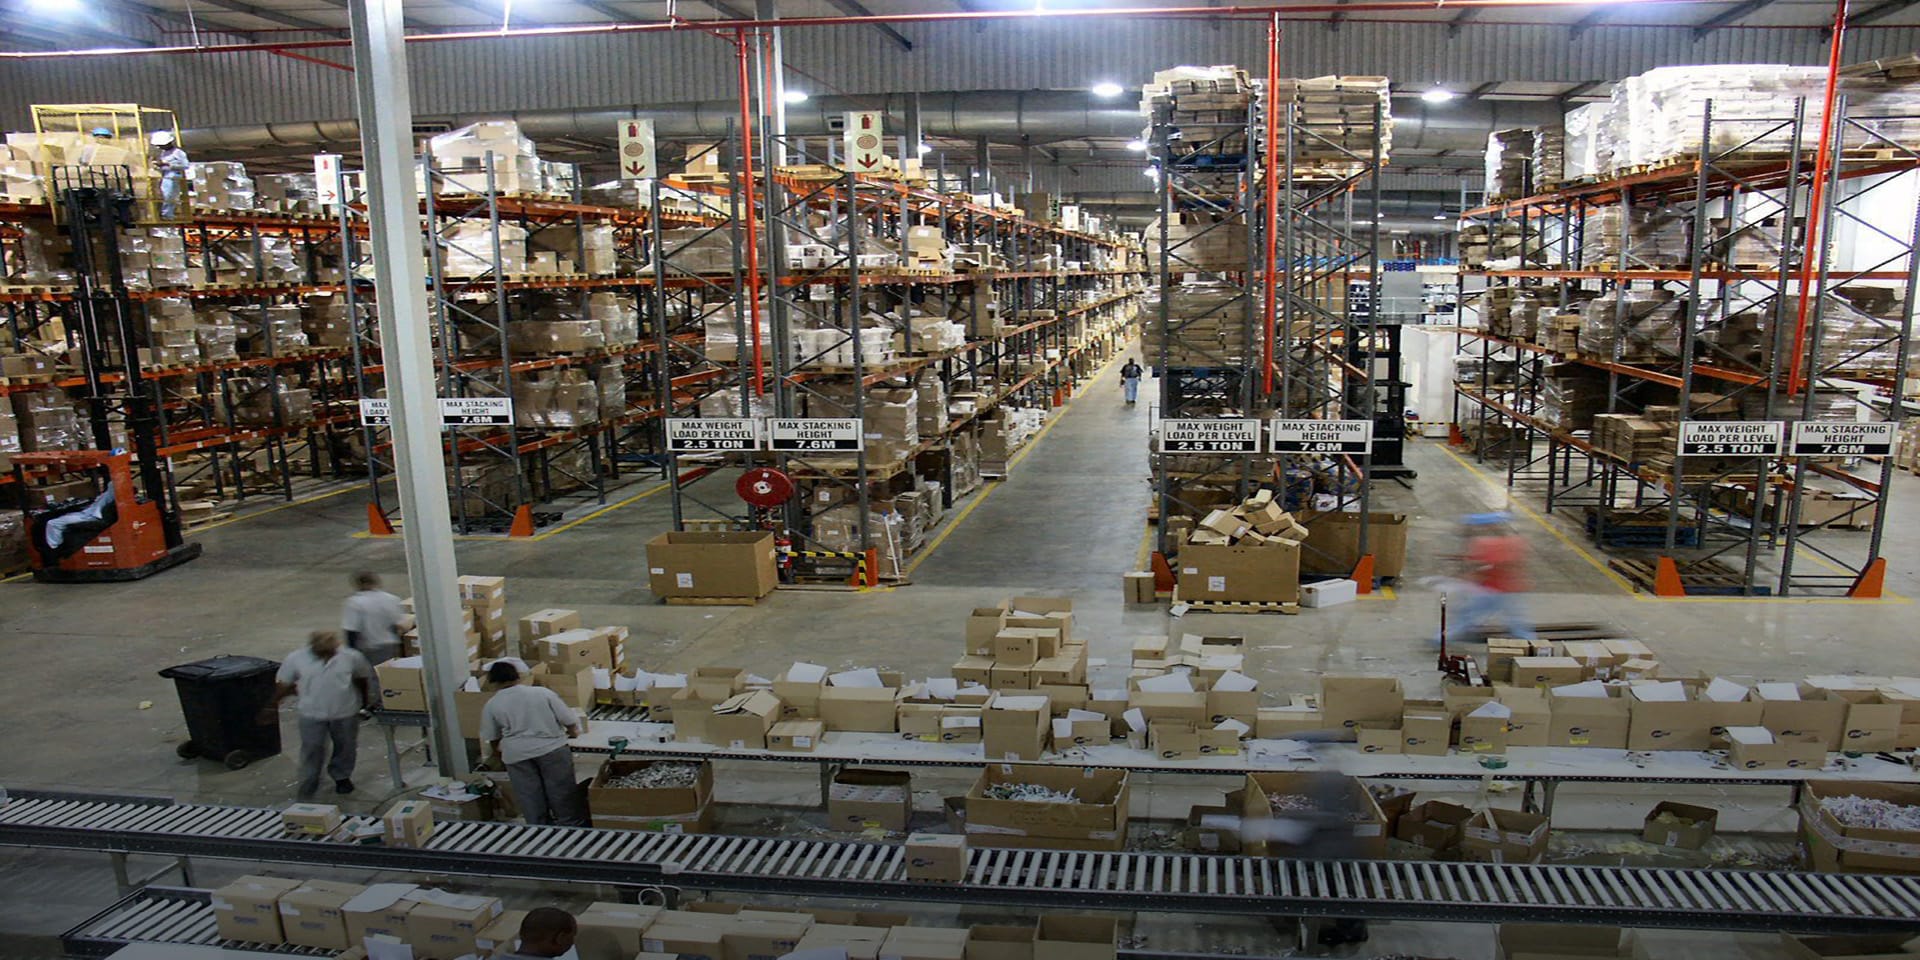 Image of a large warehouse with workers packing cardboard boxes in the foreground and several aisles of steel shelves holding boxes in the background.